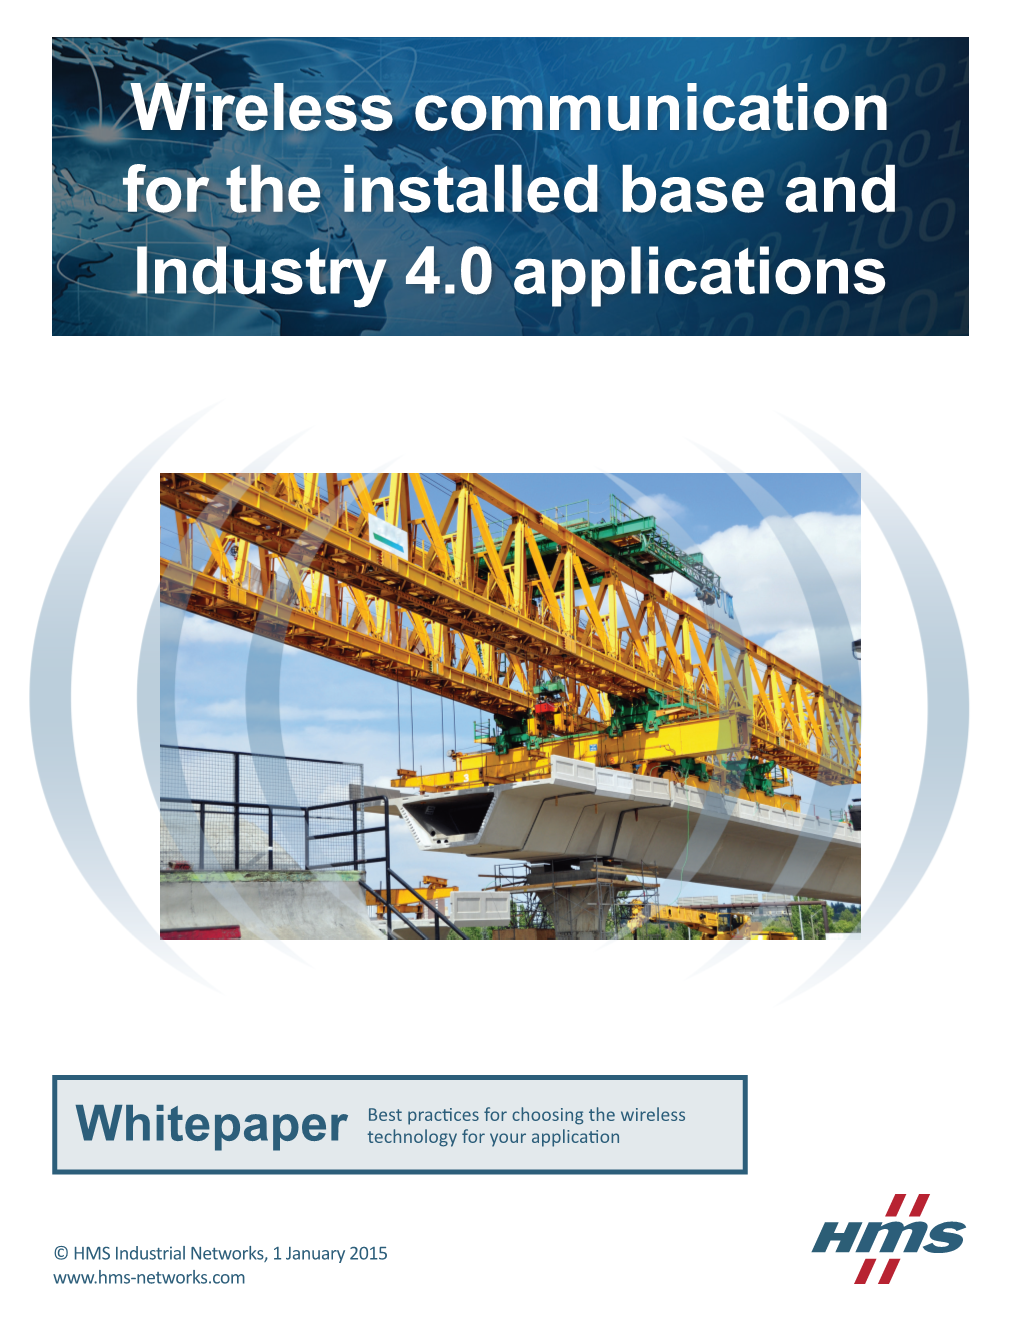 Wireless Communication for the Installed Base and Industry 4.0 Applications